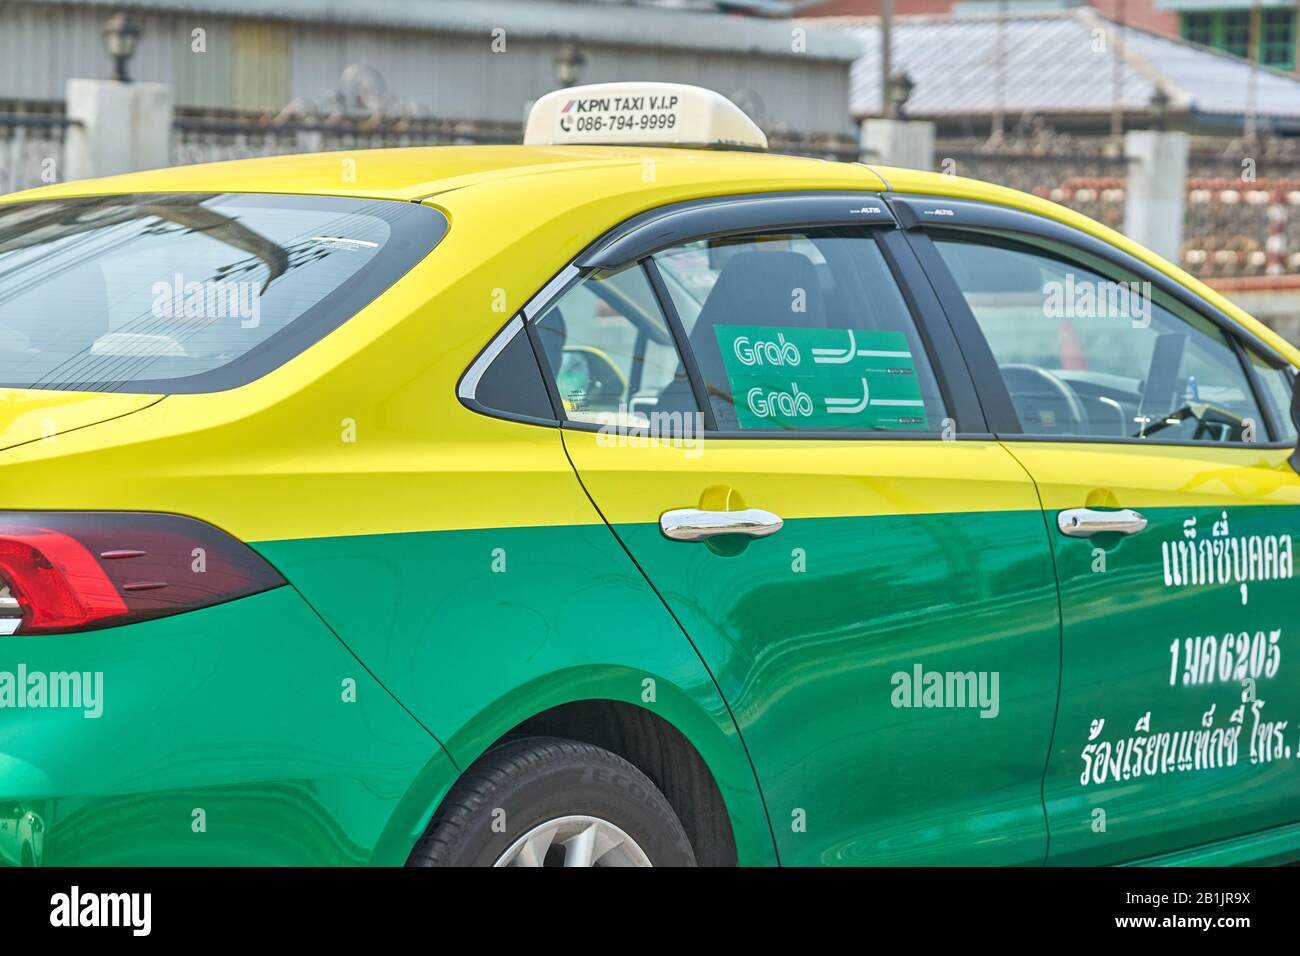 A Bangkok Grab taxi service car, in traditional green and yellow colouring. Stock Photo